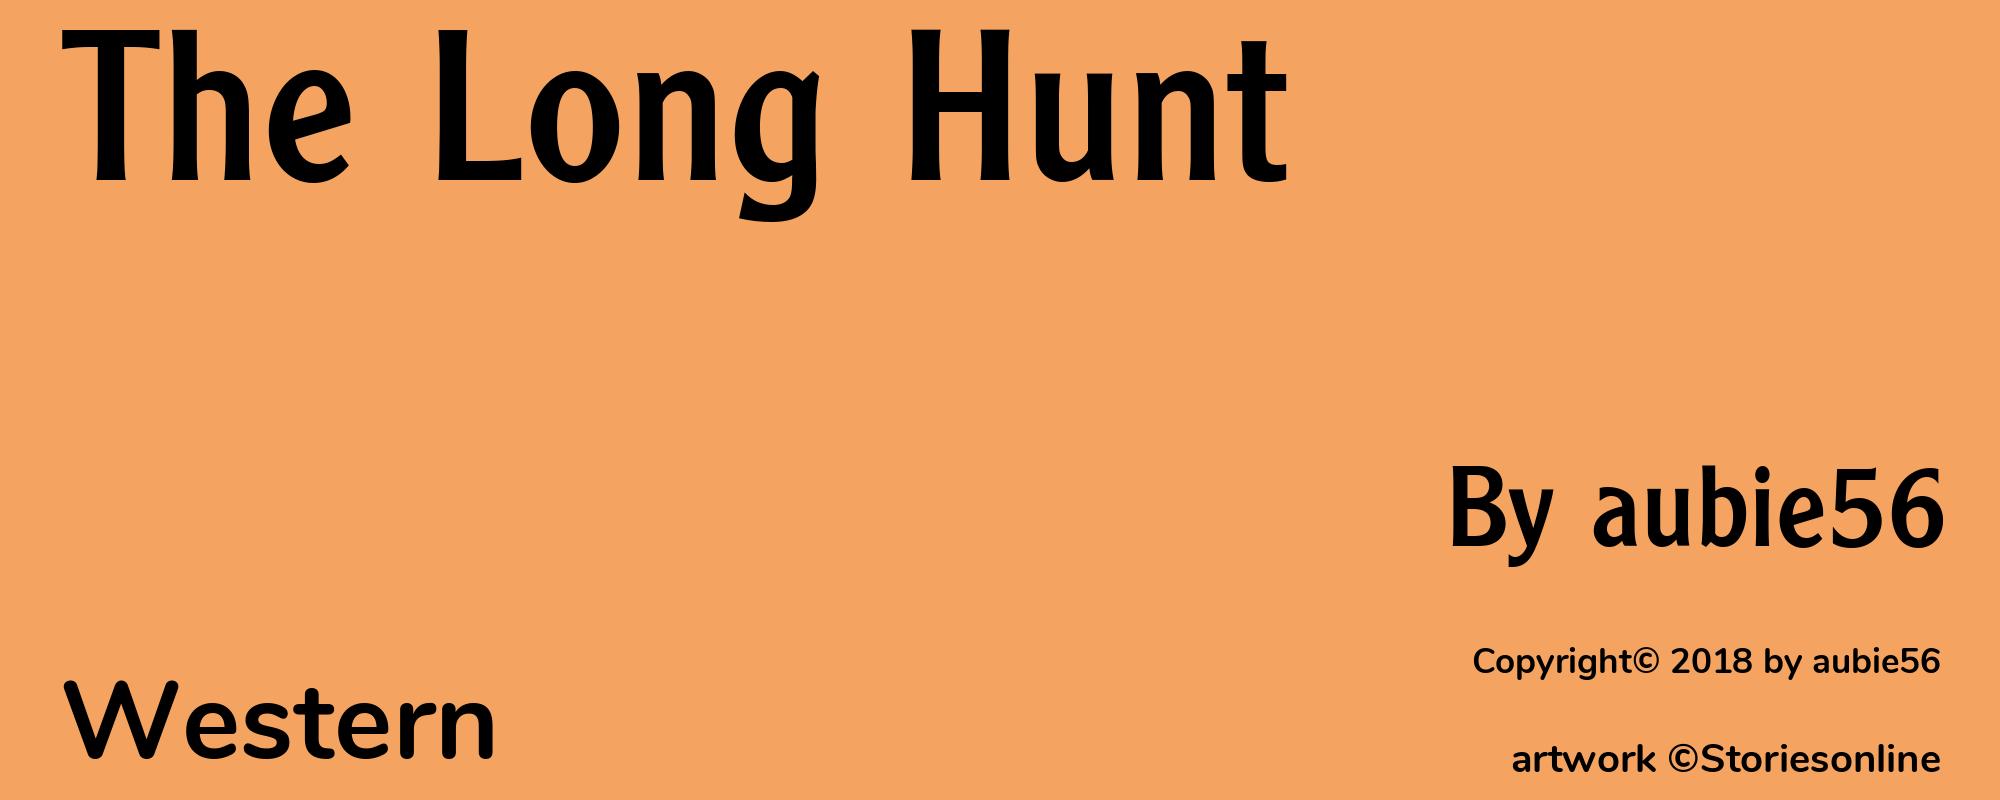 The Long Hunt - Cover